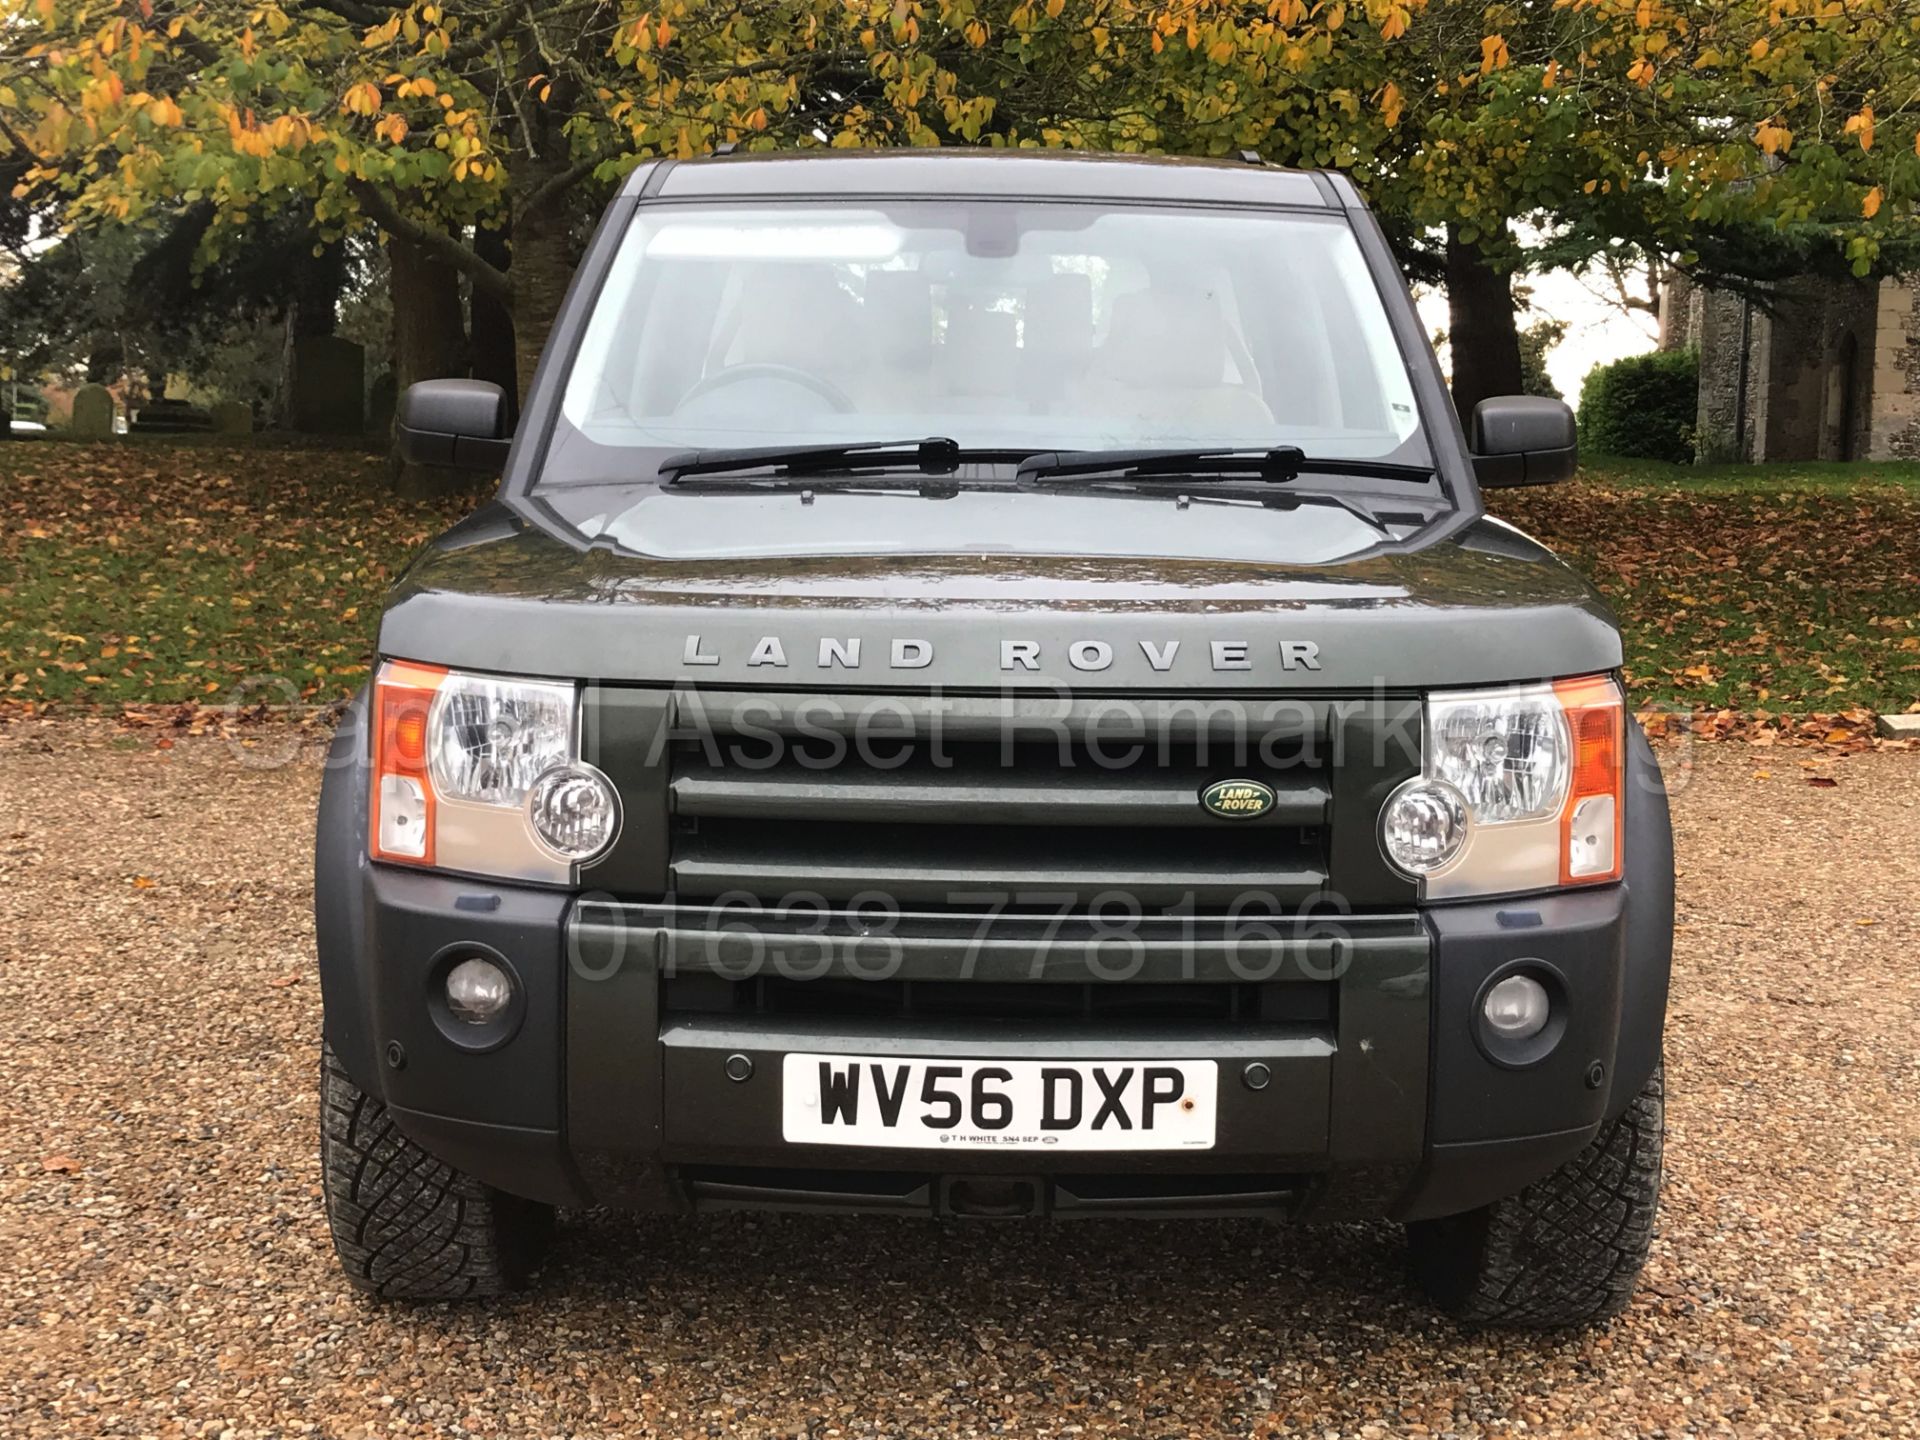 LAND ROVER DISCOVERY 3 SE (2007 MODEL) 'TDV6 - AUTO - LEATHER - SAT NAV - 7 SEATER' *MASSIVE SPEC* - Image 3 of 36